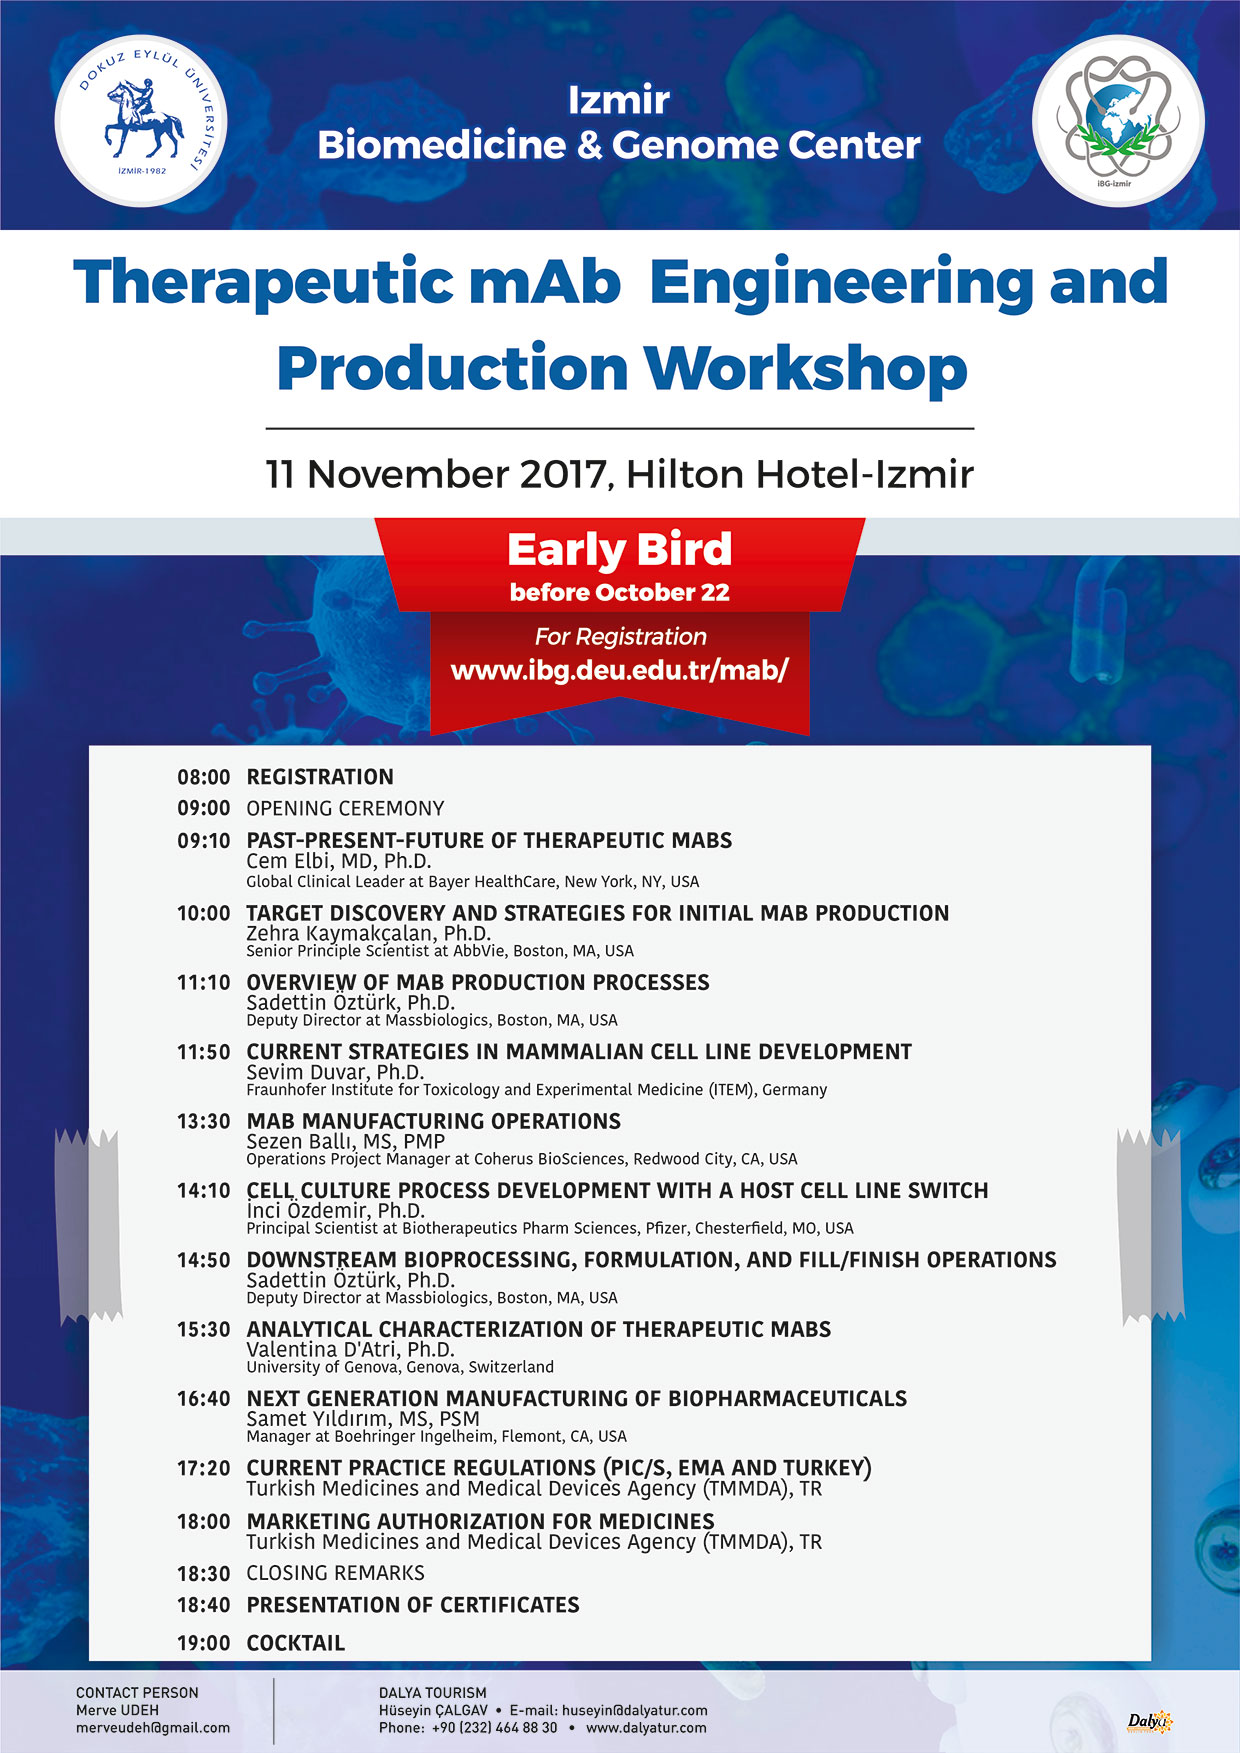 Therapeutic mAb Engineering and Production Workshop